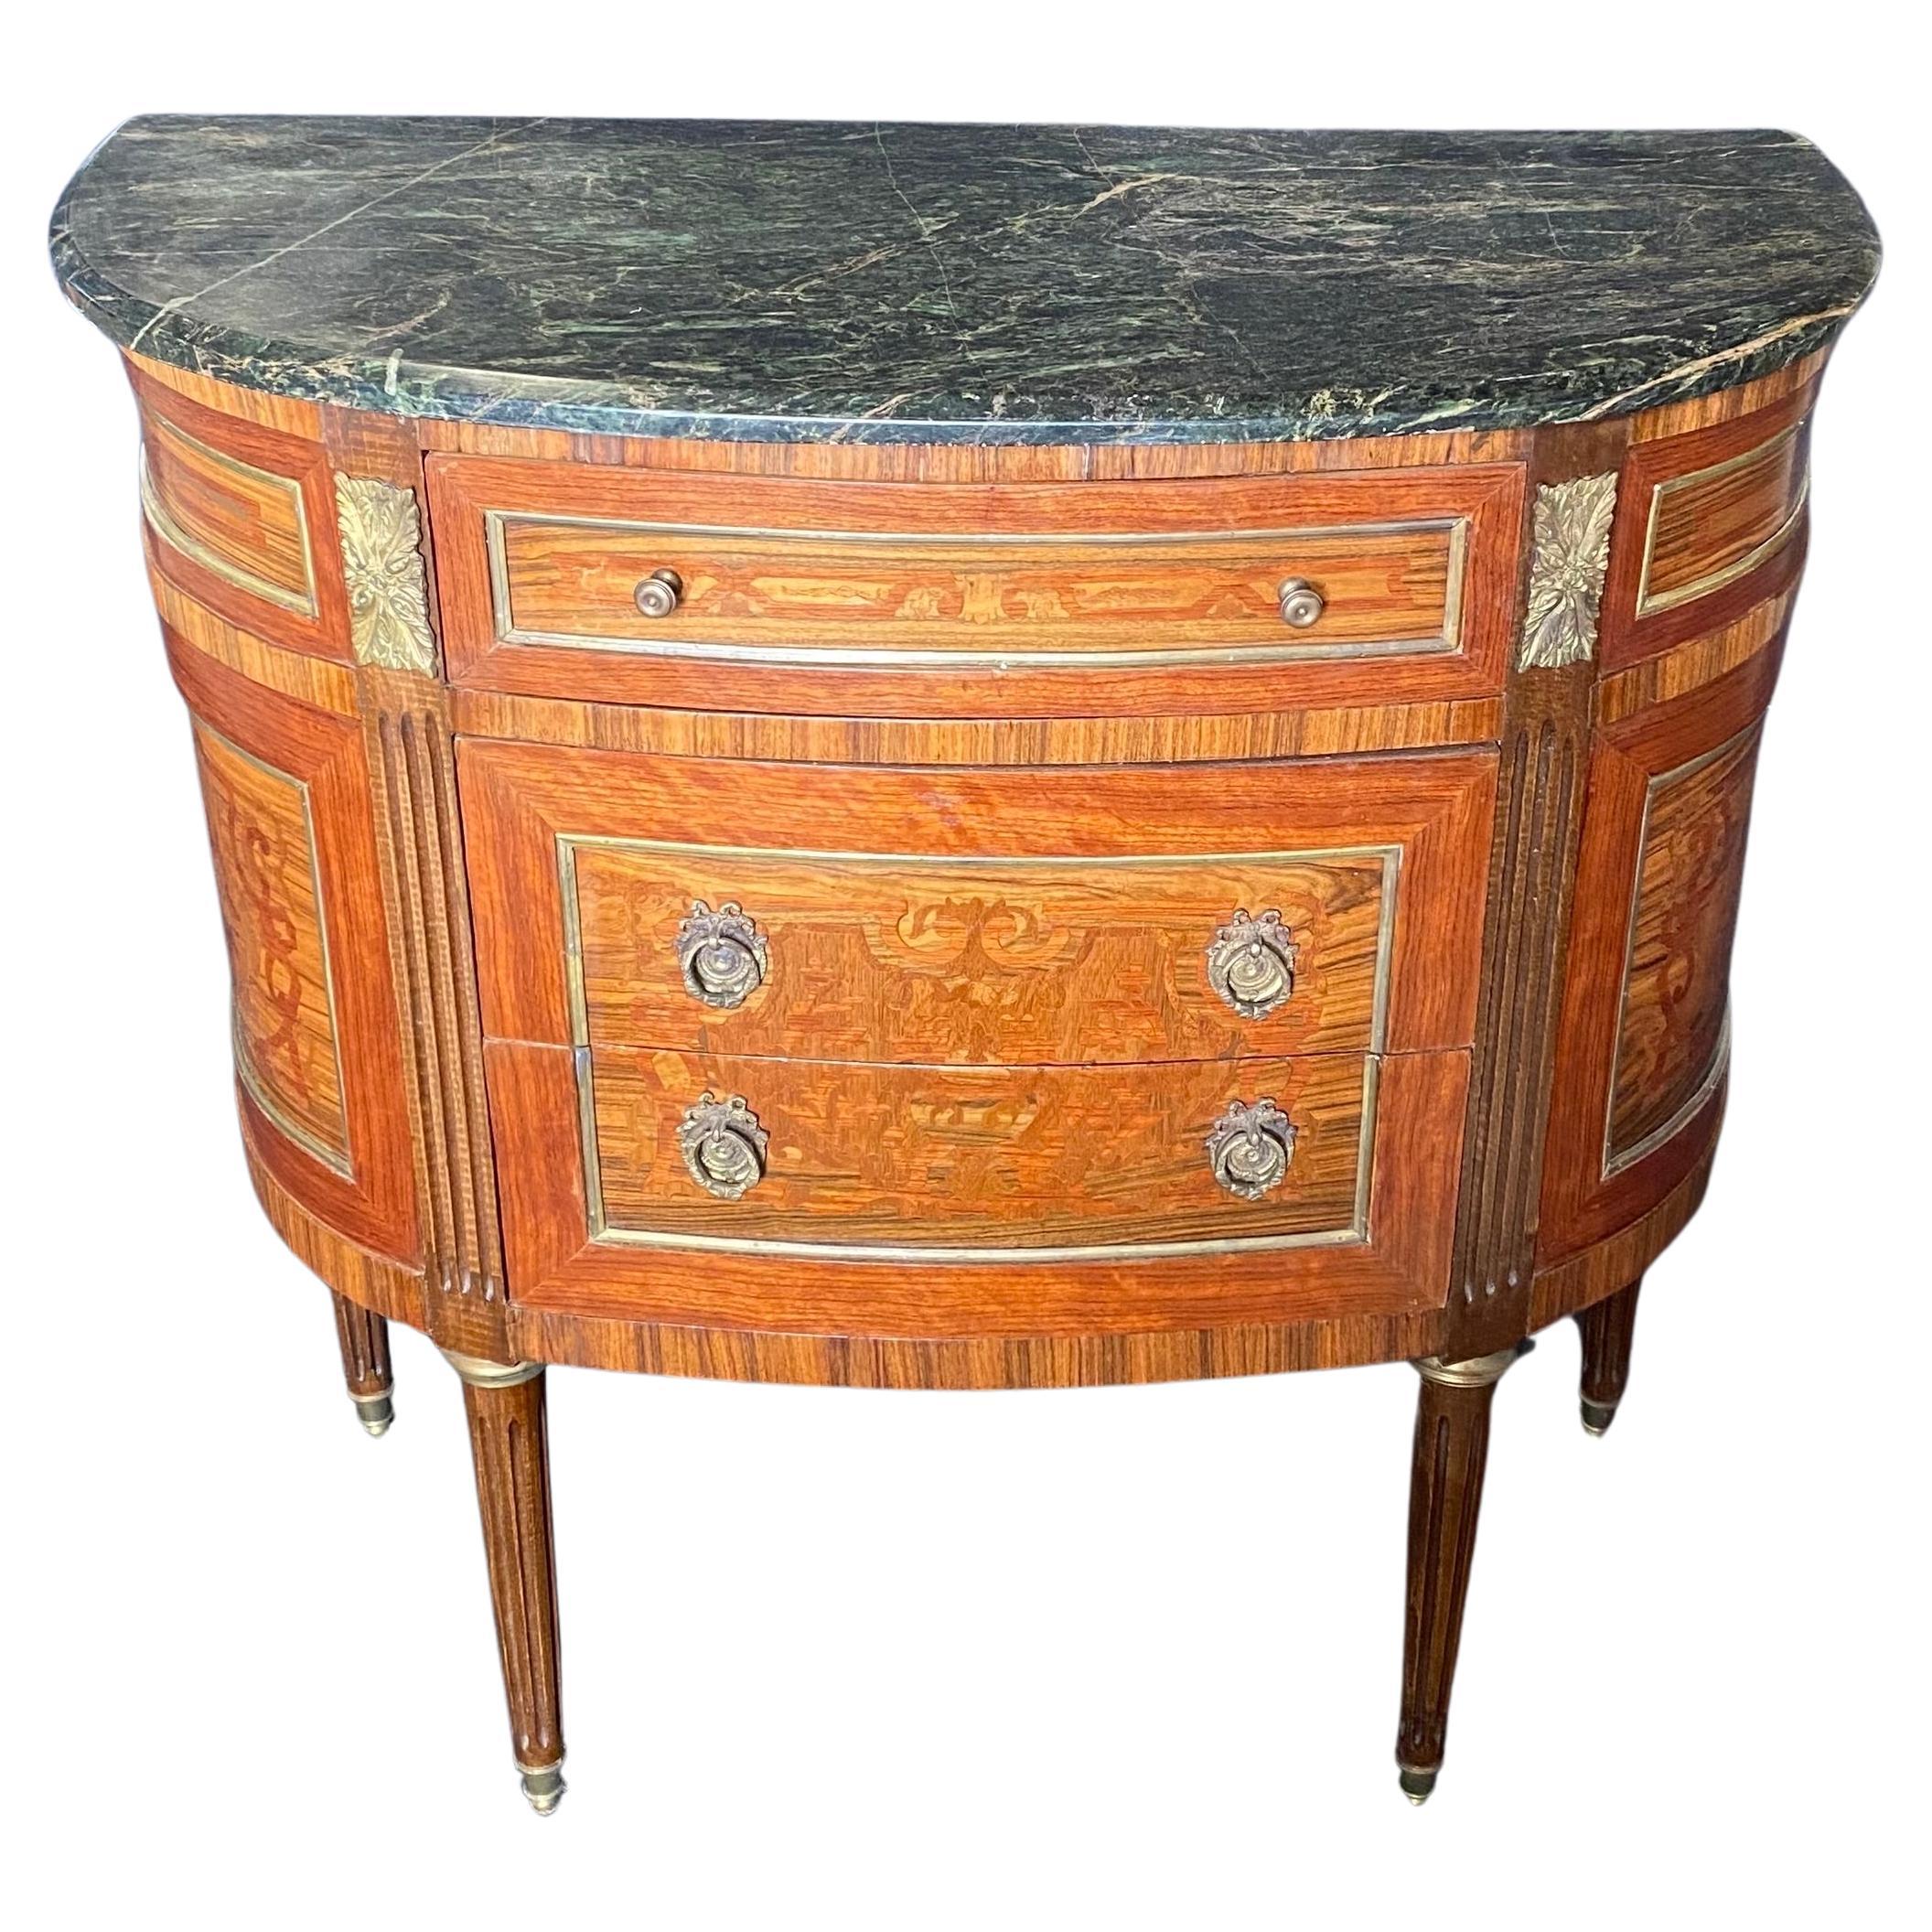 French Louis XVI Marble Top Inlaid Demilune Walnut and Fruitwood Commode Console For Sale